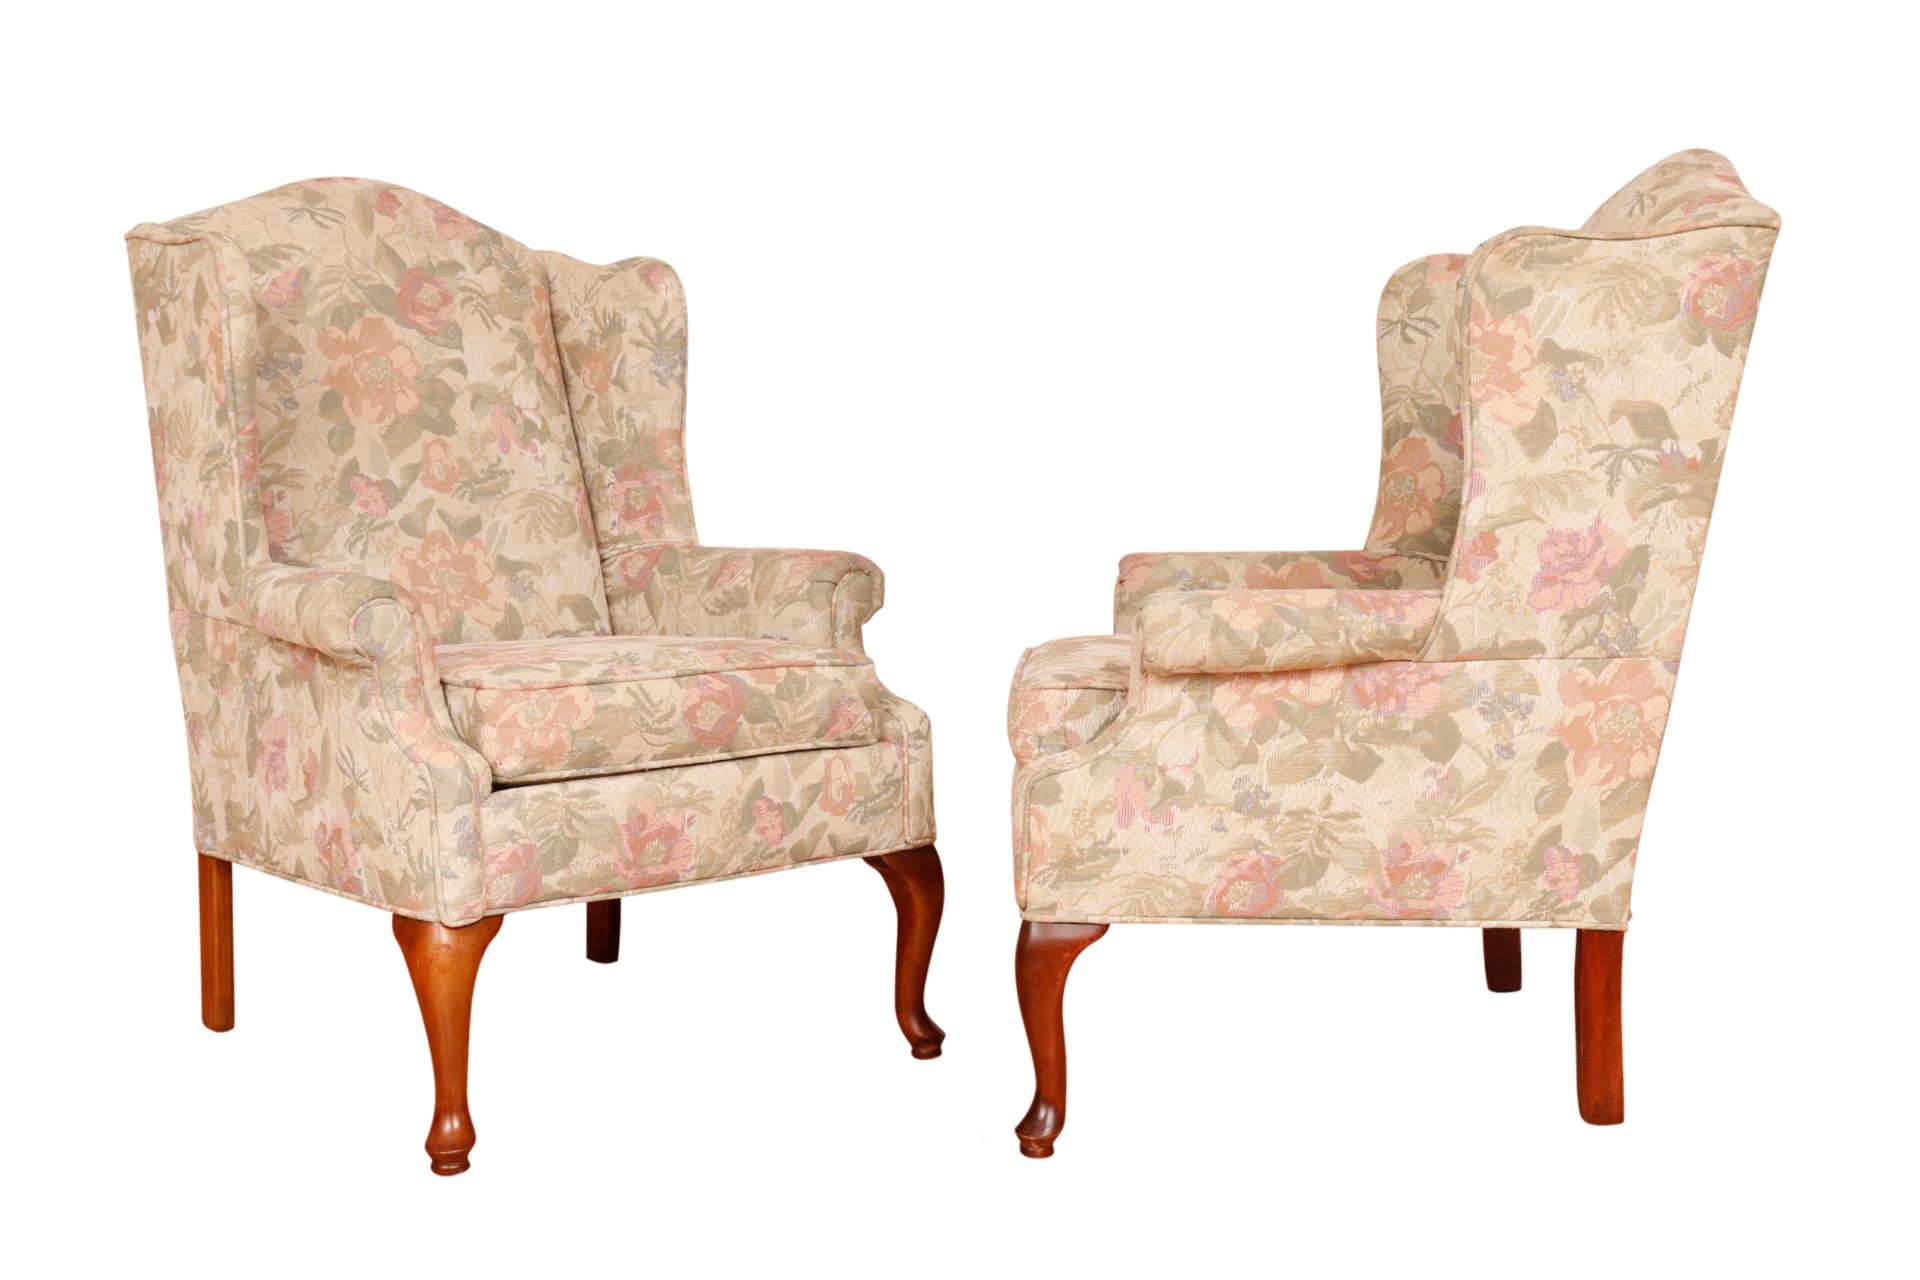 A pair of Queen Anne style wingback chairs made by Rowe Furniture. Upholstered throughout in a floral jacquard decorated with roses in blush and rich foliage in sage over a taupe base. Cabriole legs finish in round pad feet. Arm height 24